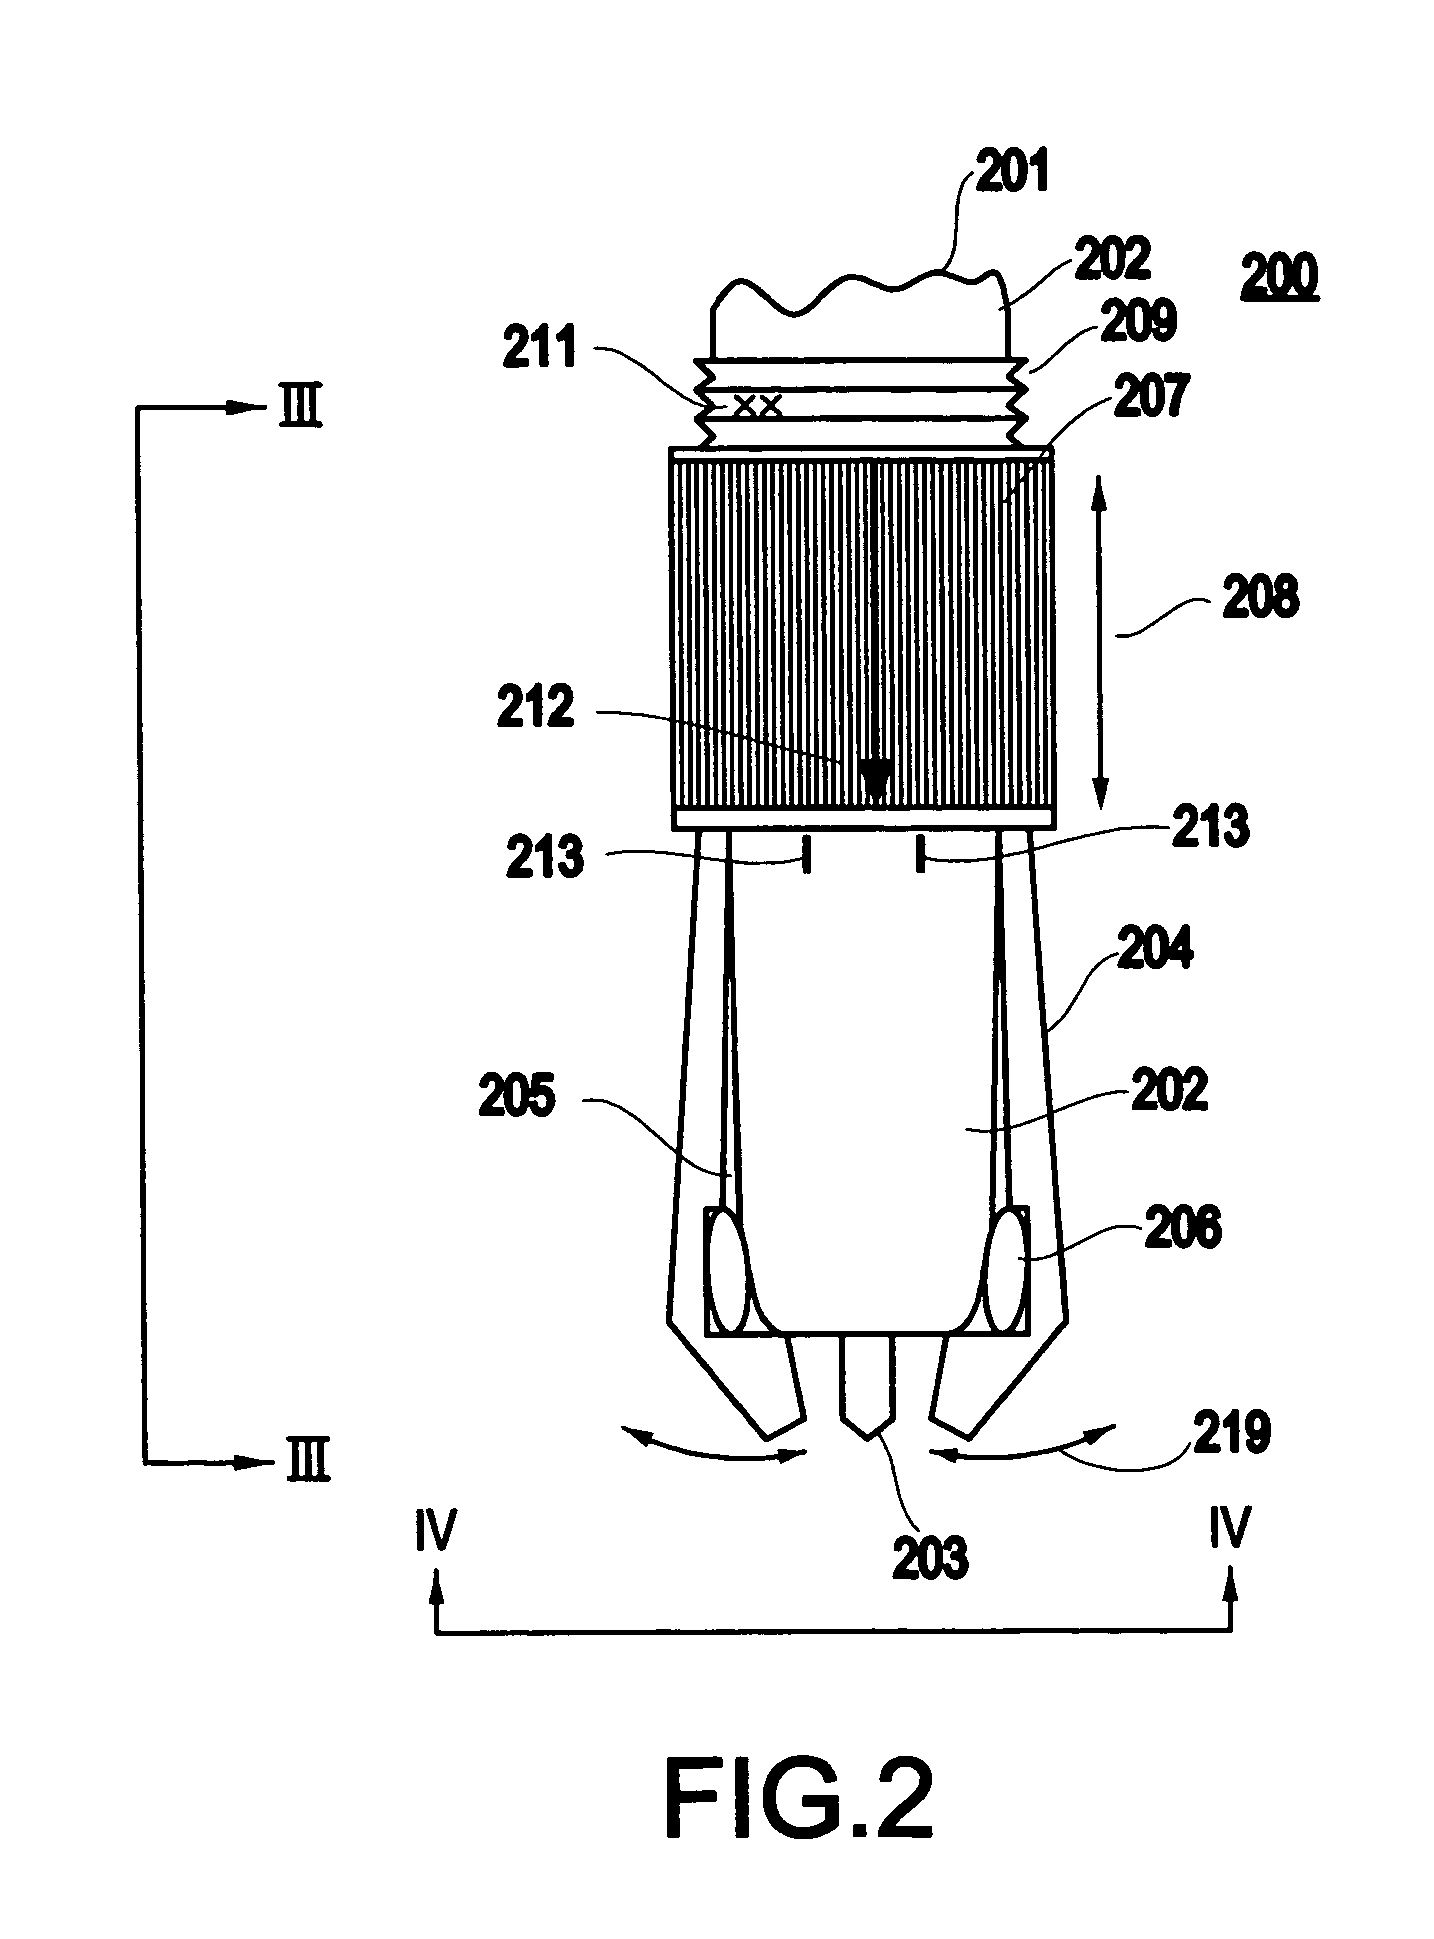 Method and structure for variable pitch microwave probe assembly